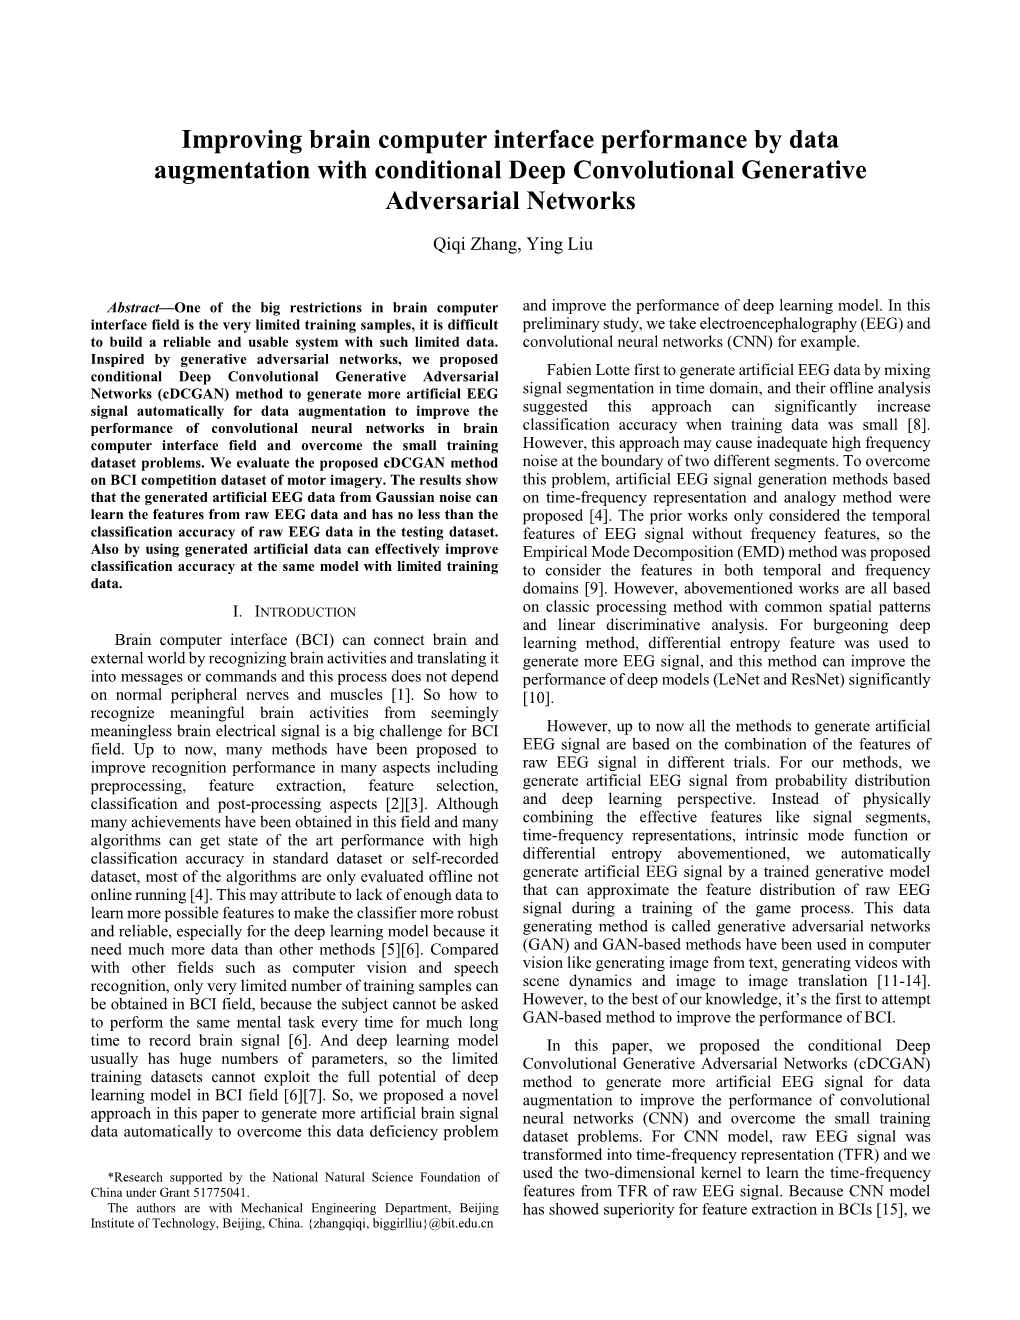 Improving Brain Computer Interface Performance by Data Augmentation with Conditional Deep Convolutional Generative Adversarial Networks